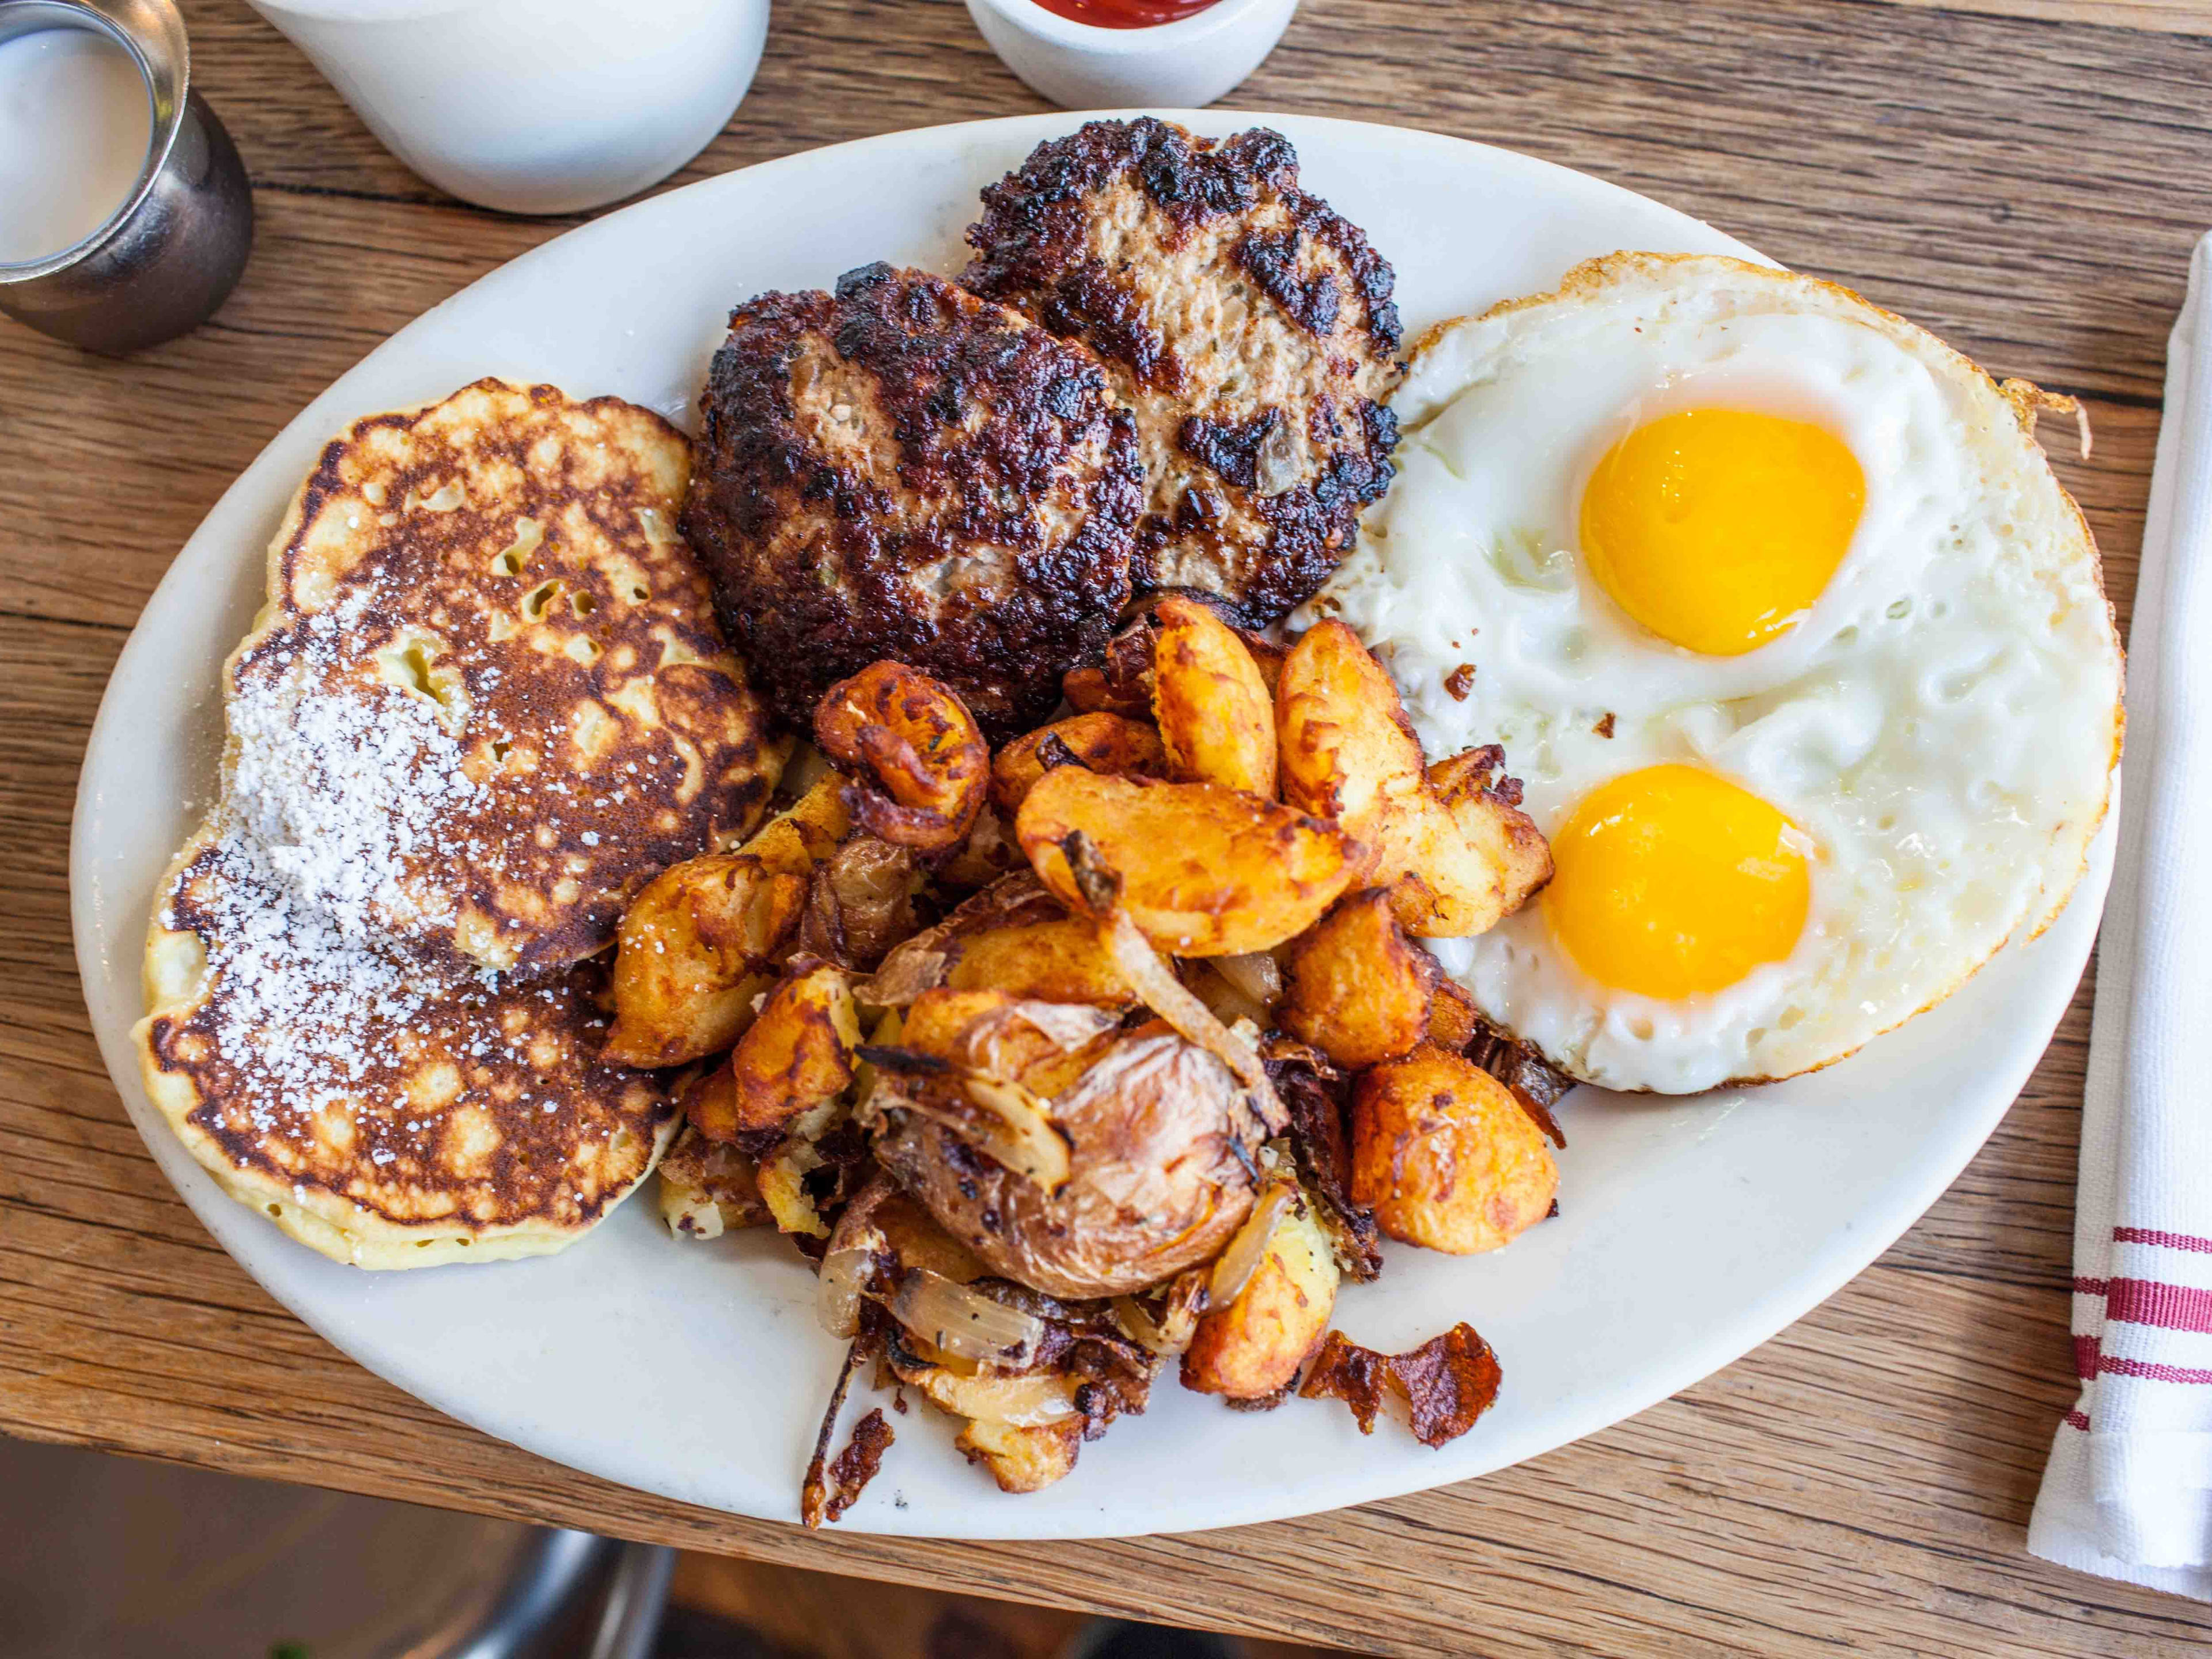 The Plow plate with sausages, eggs, potatoes, and pancakes at Plow